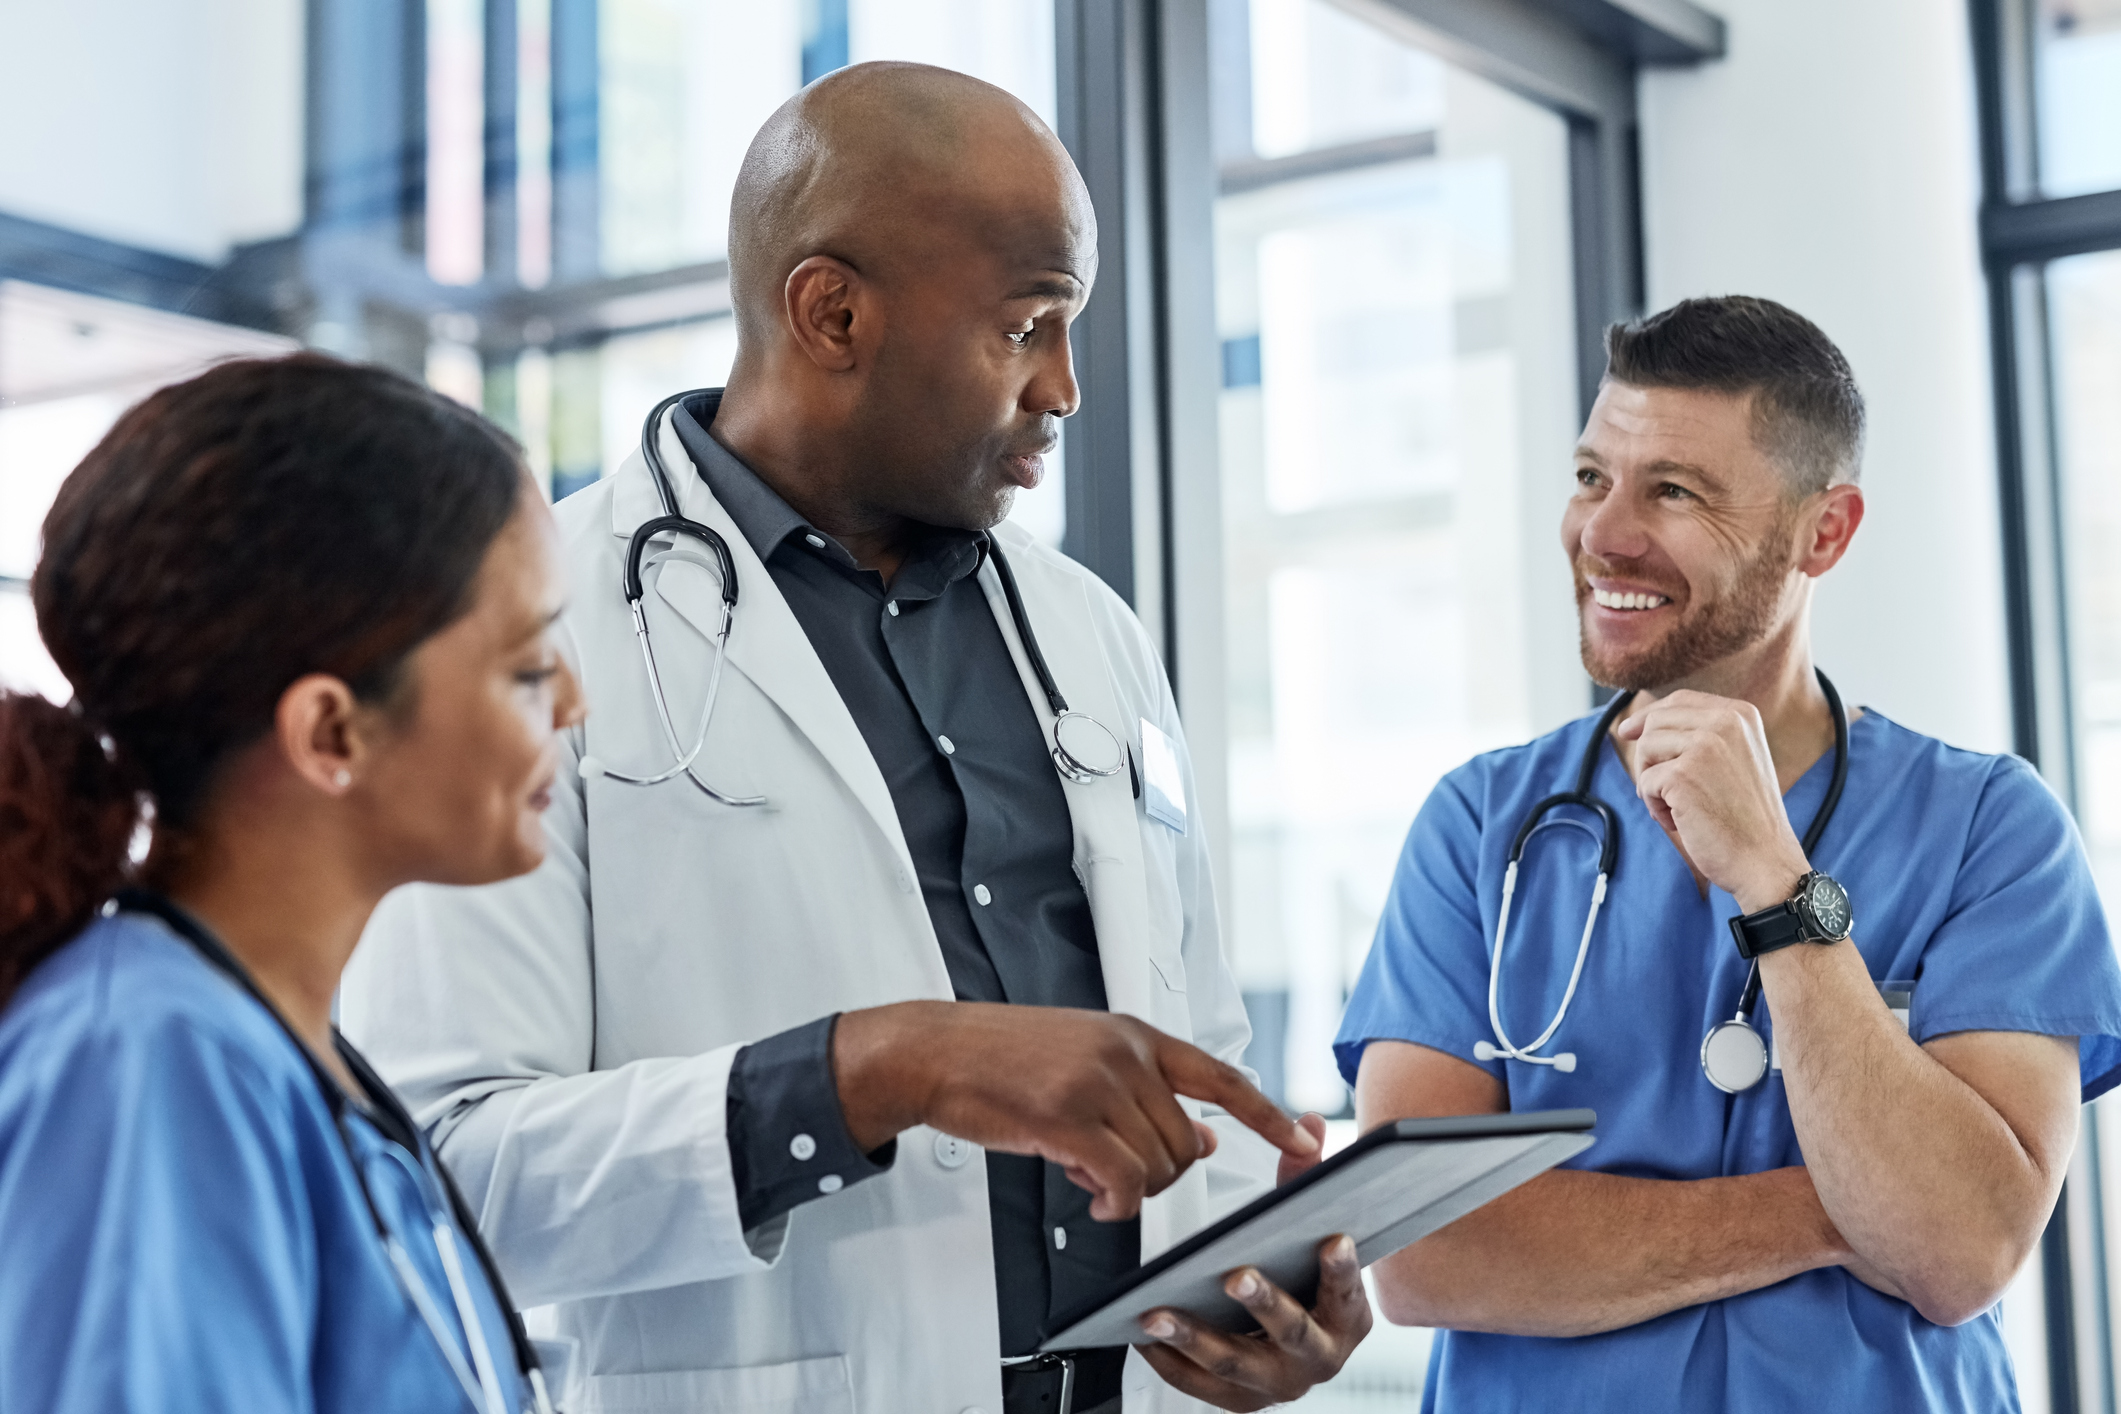 Diversity and inclusion in healthcare settings